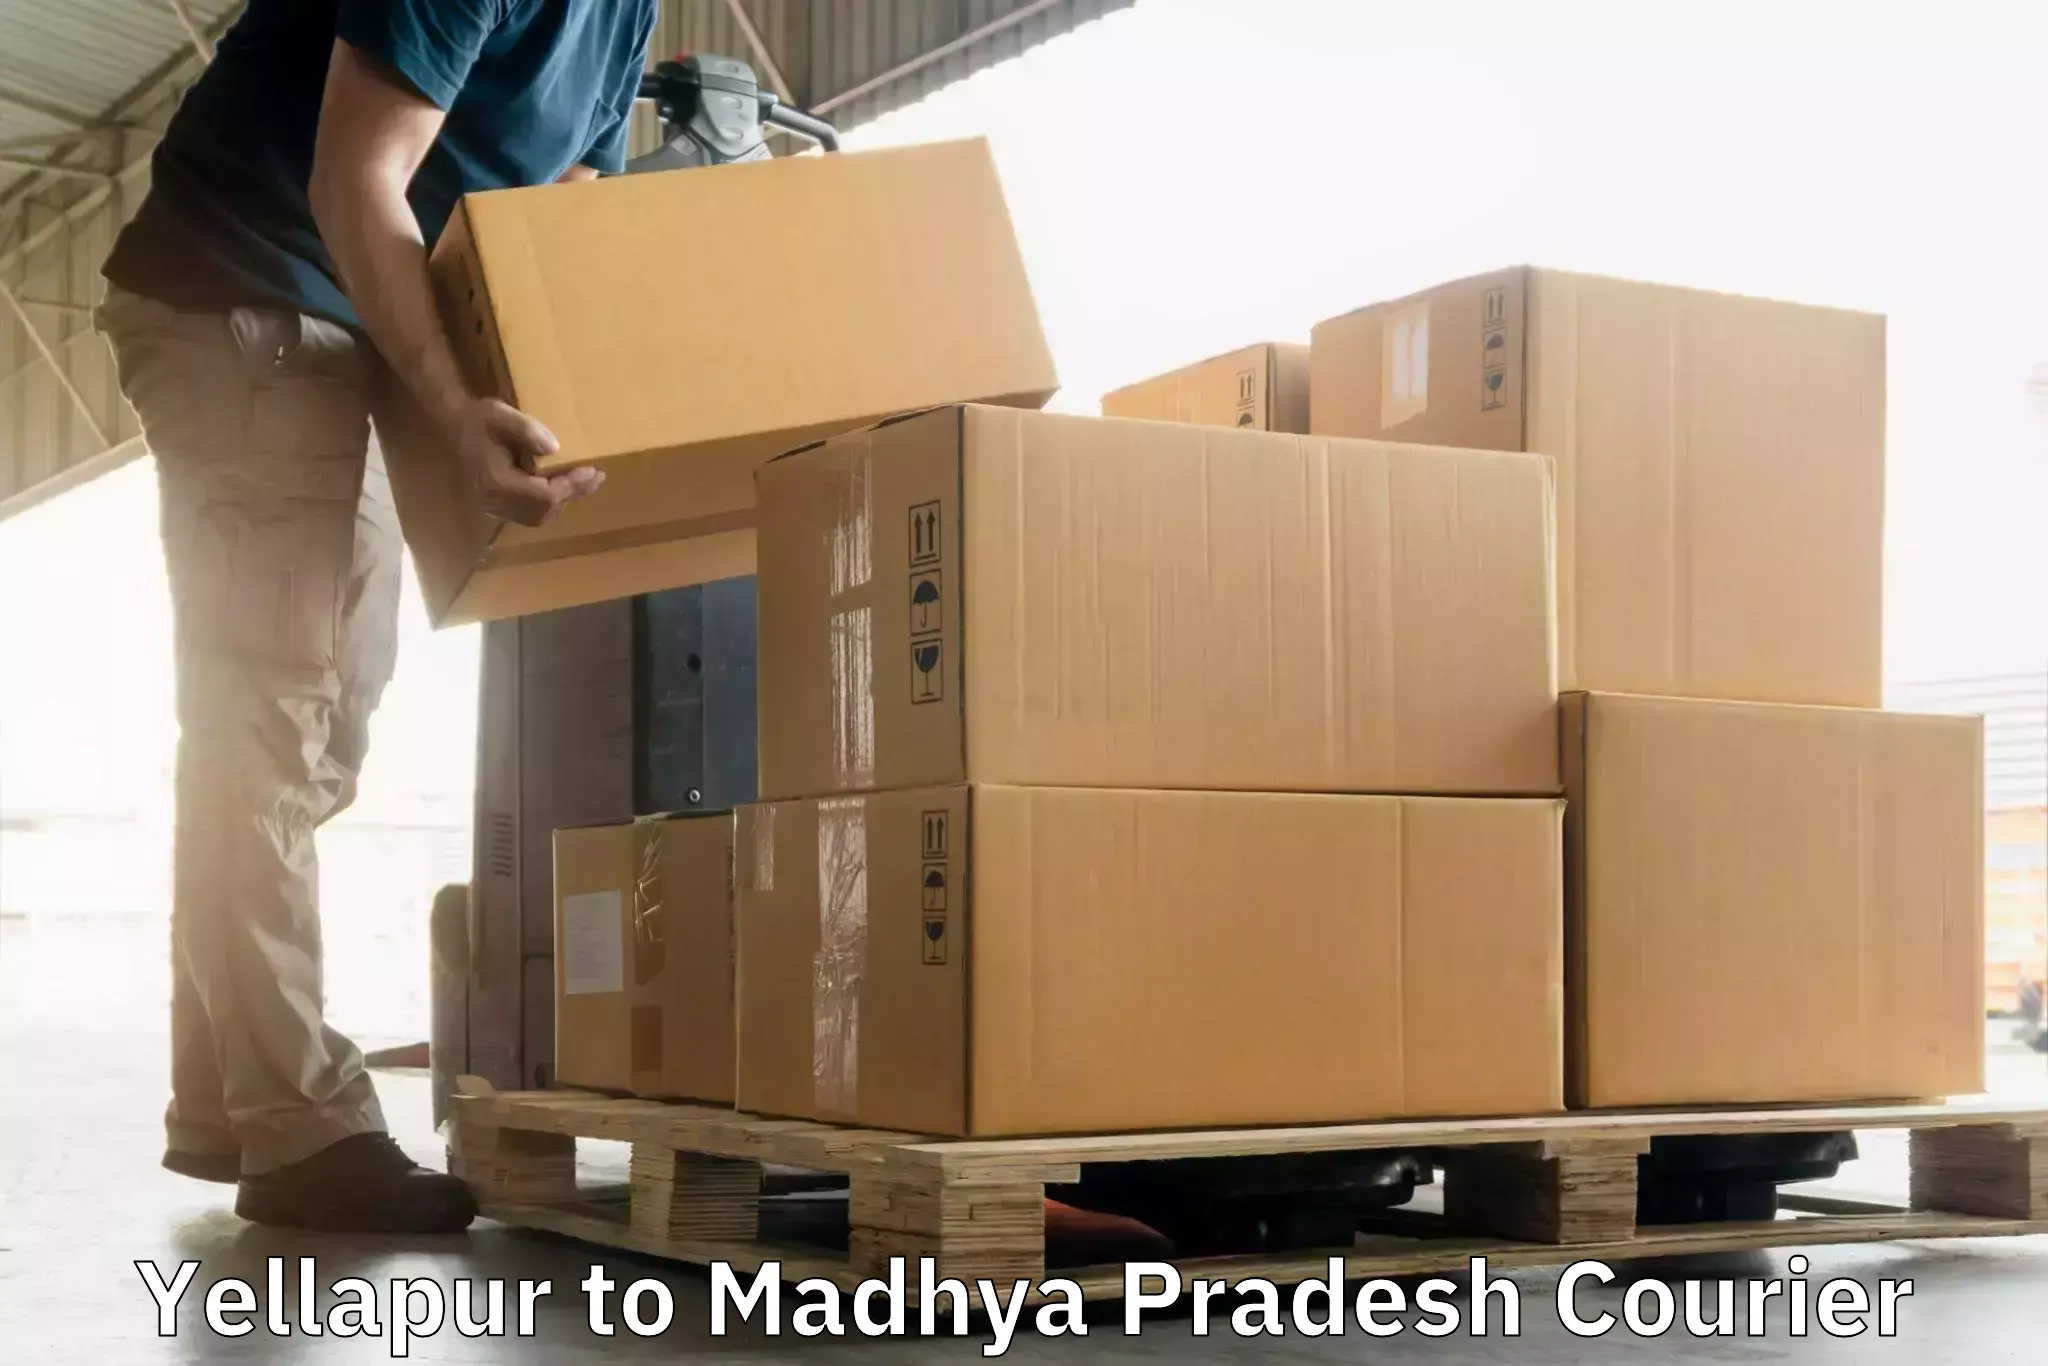 Next-generation courier services Yellapur to Dhamnod